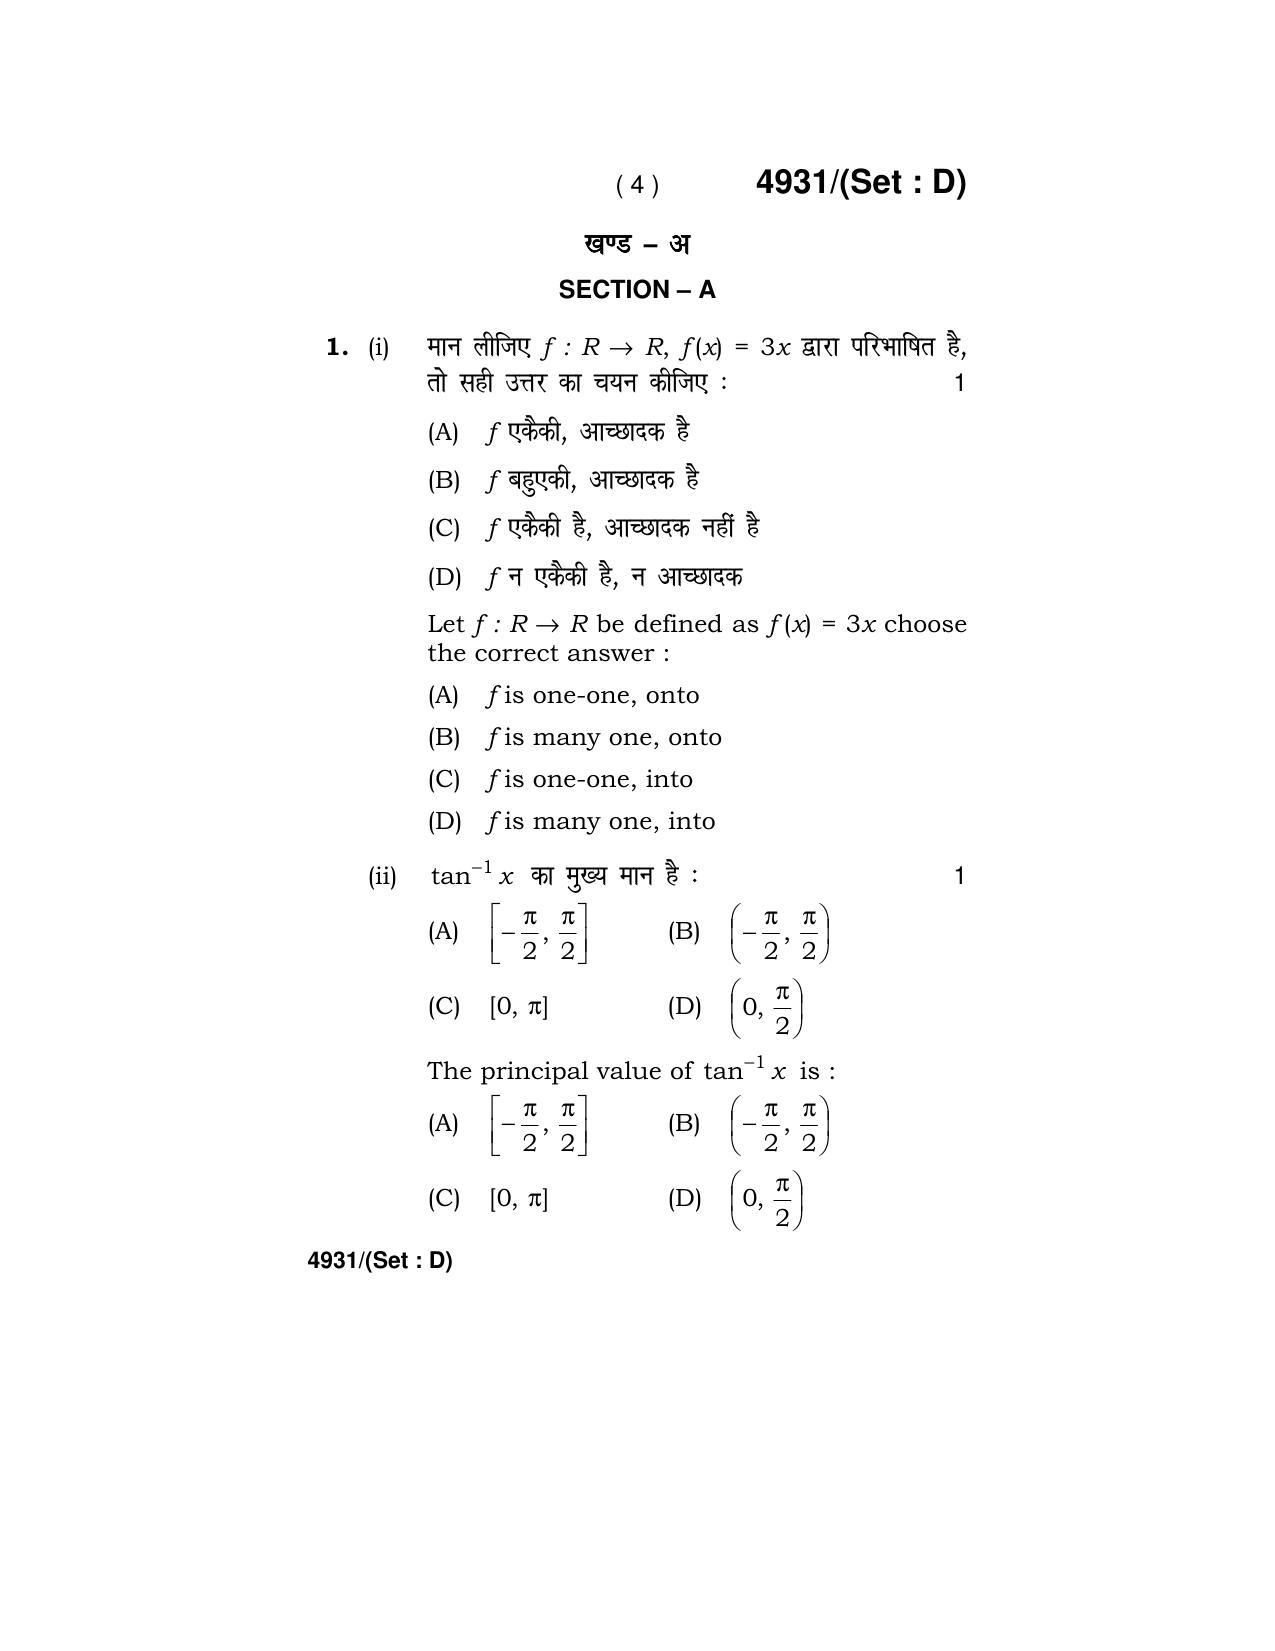 Haryana Board HBSE Class 12 Mathematics 2020 Question Paper - Page 52